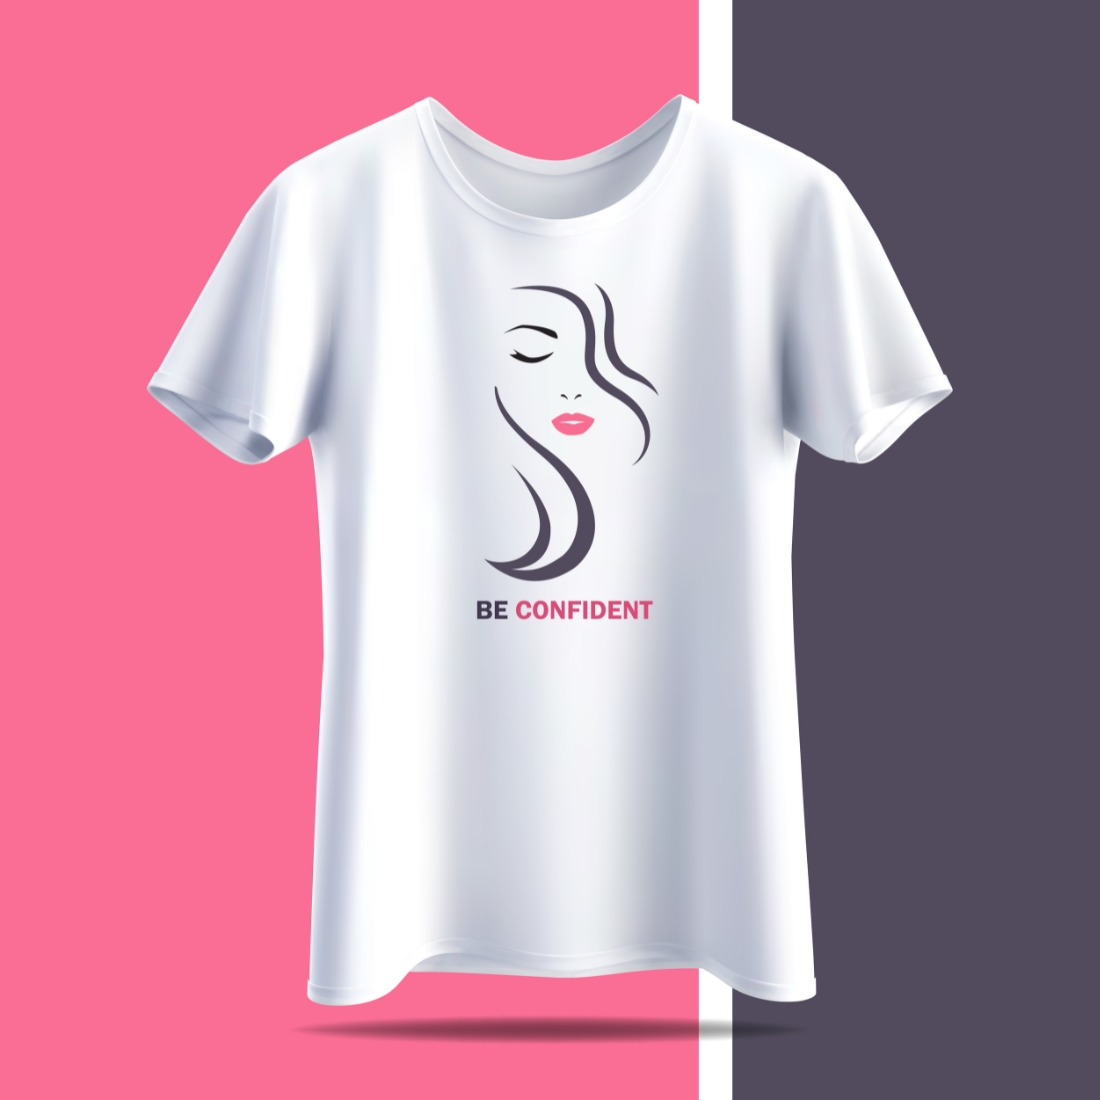 Types Women Shirts Vector & Photo (Free Trial)